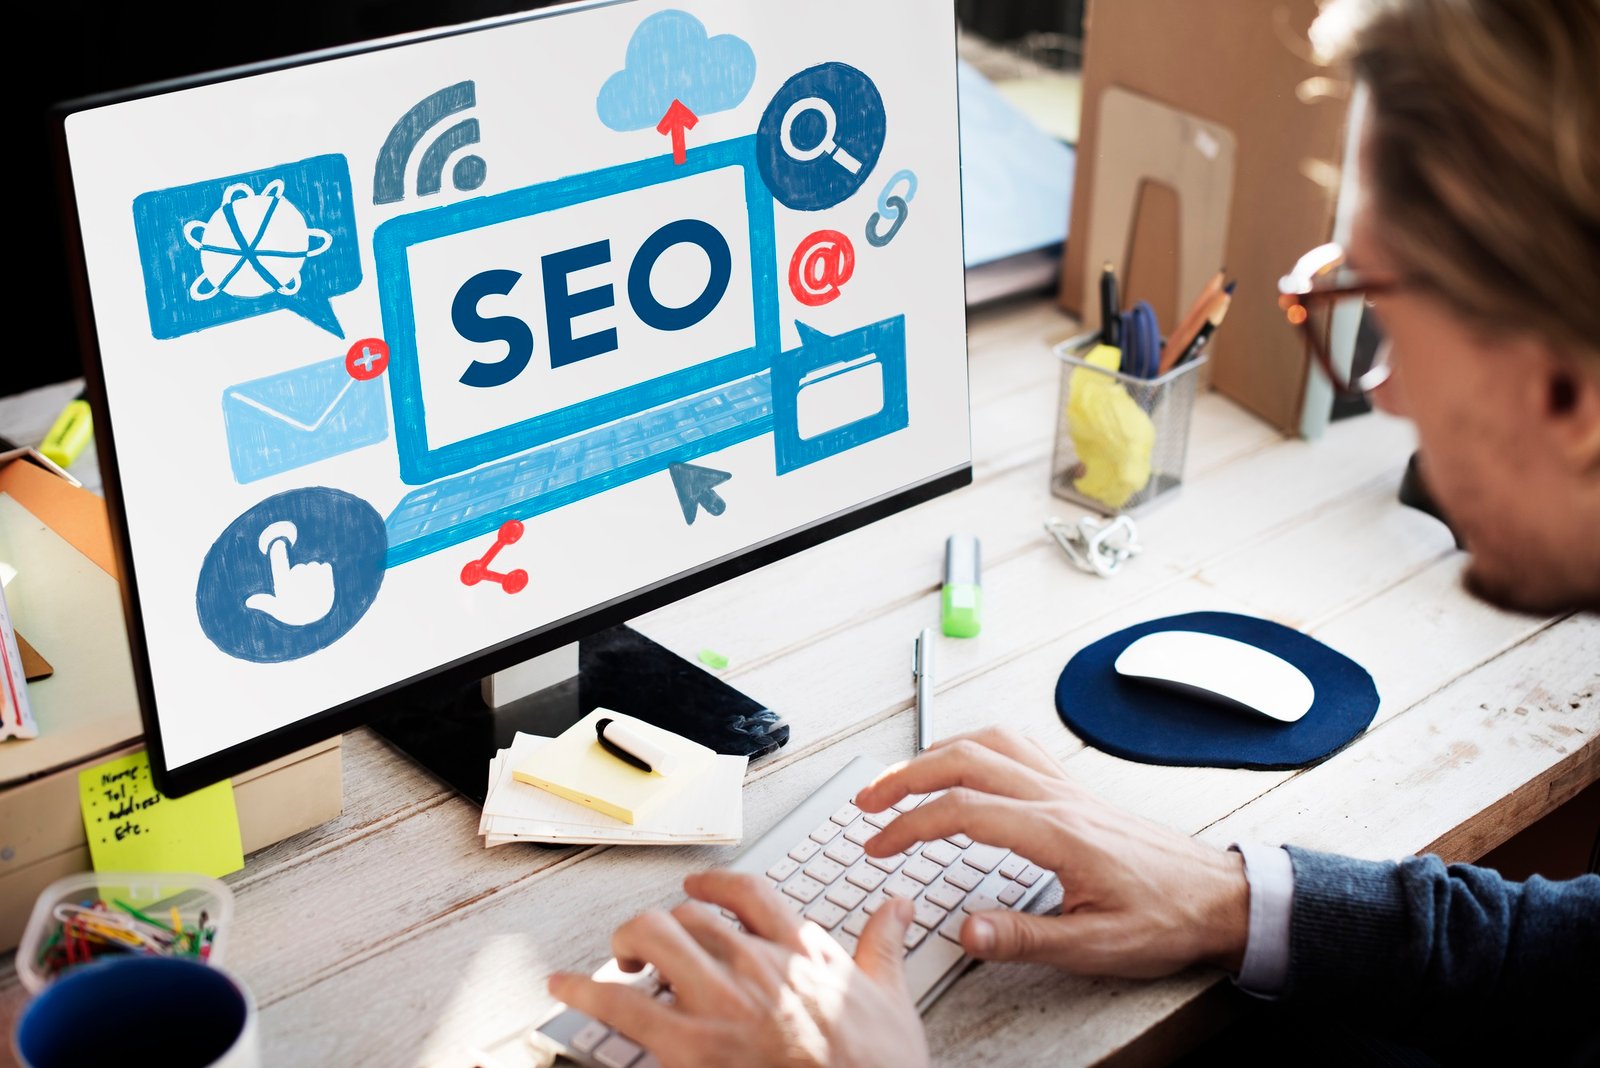 The Top SEO Services Company in Cardiff Unveiled!